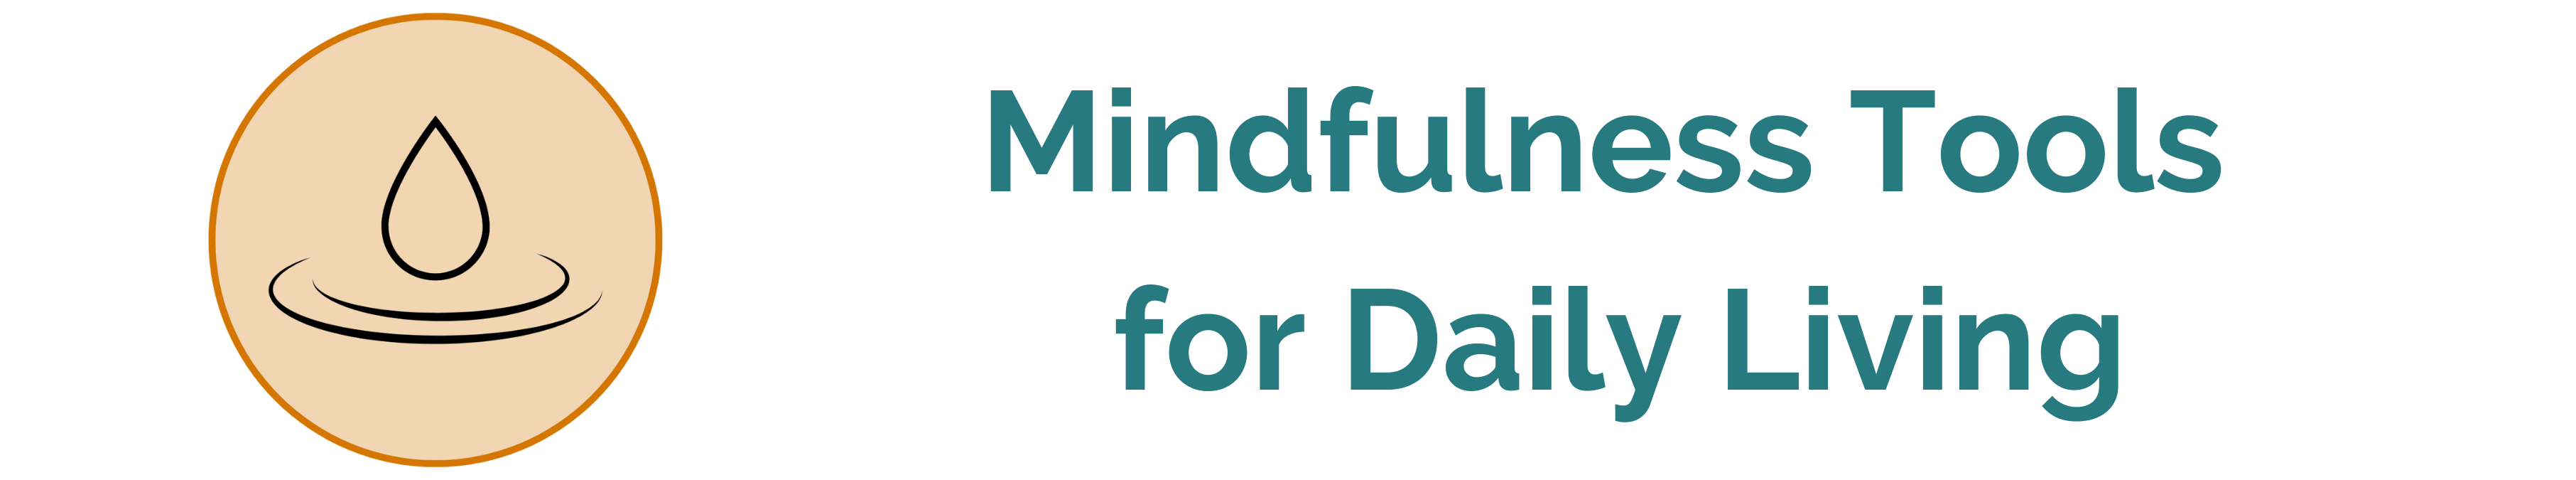 Icon and title Mindfulness Tools for Daily Living